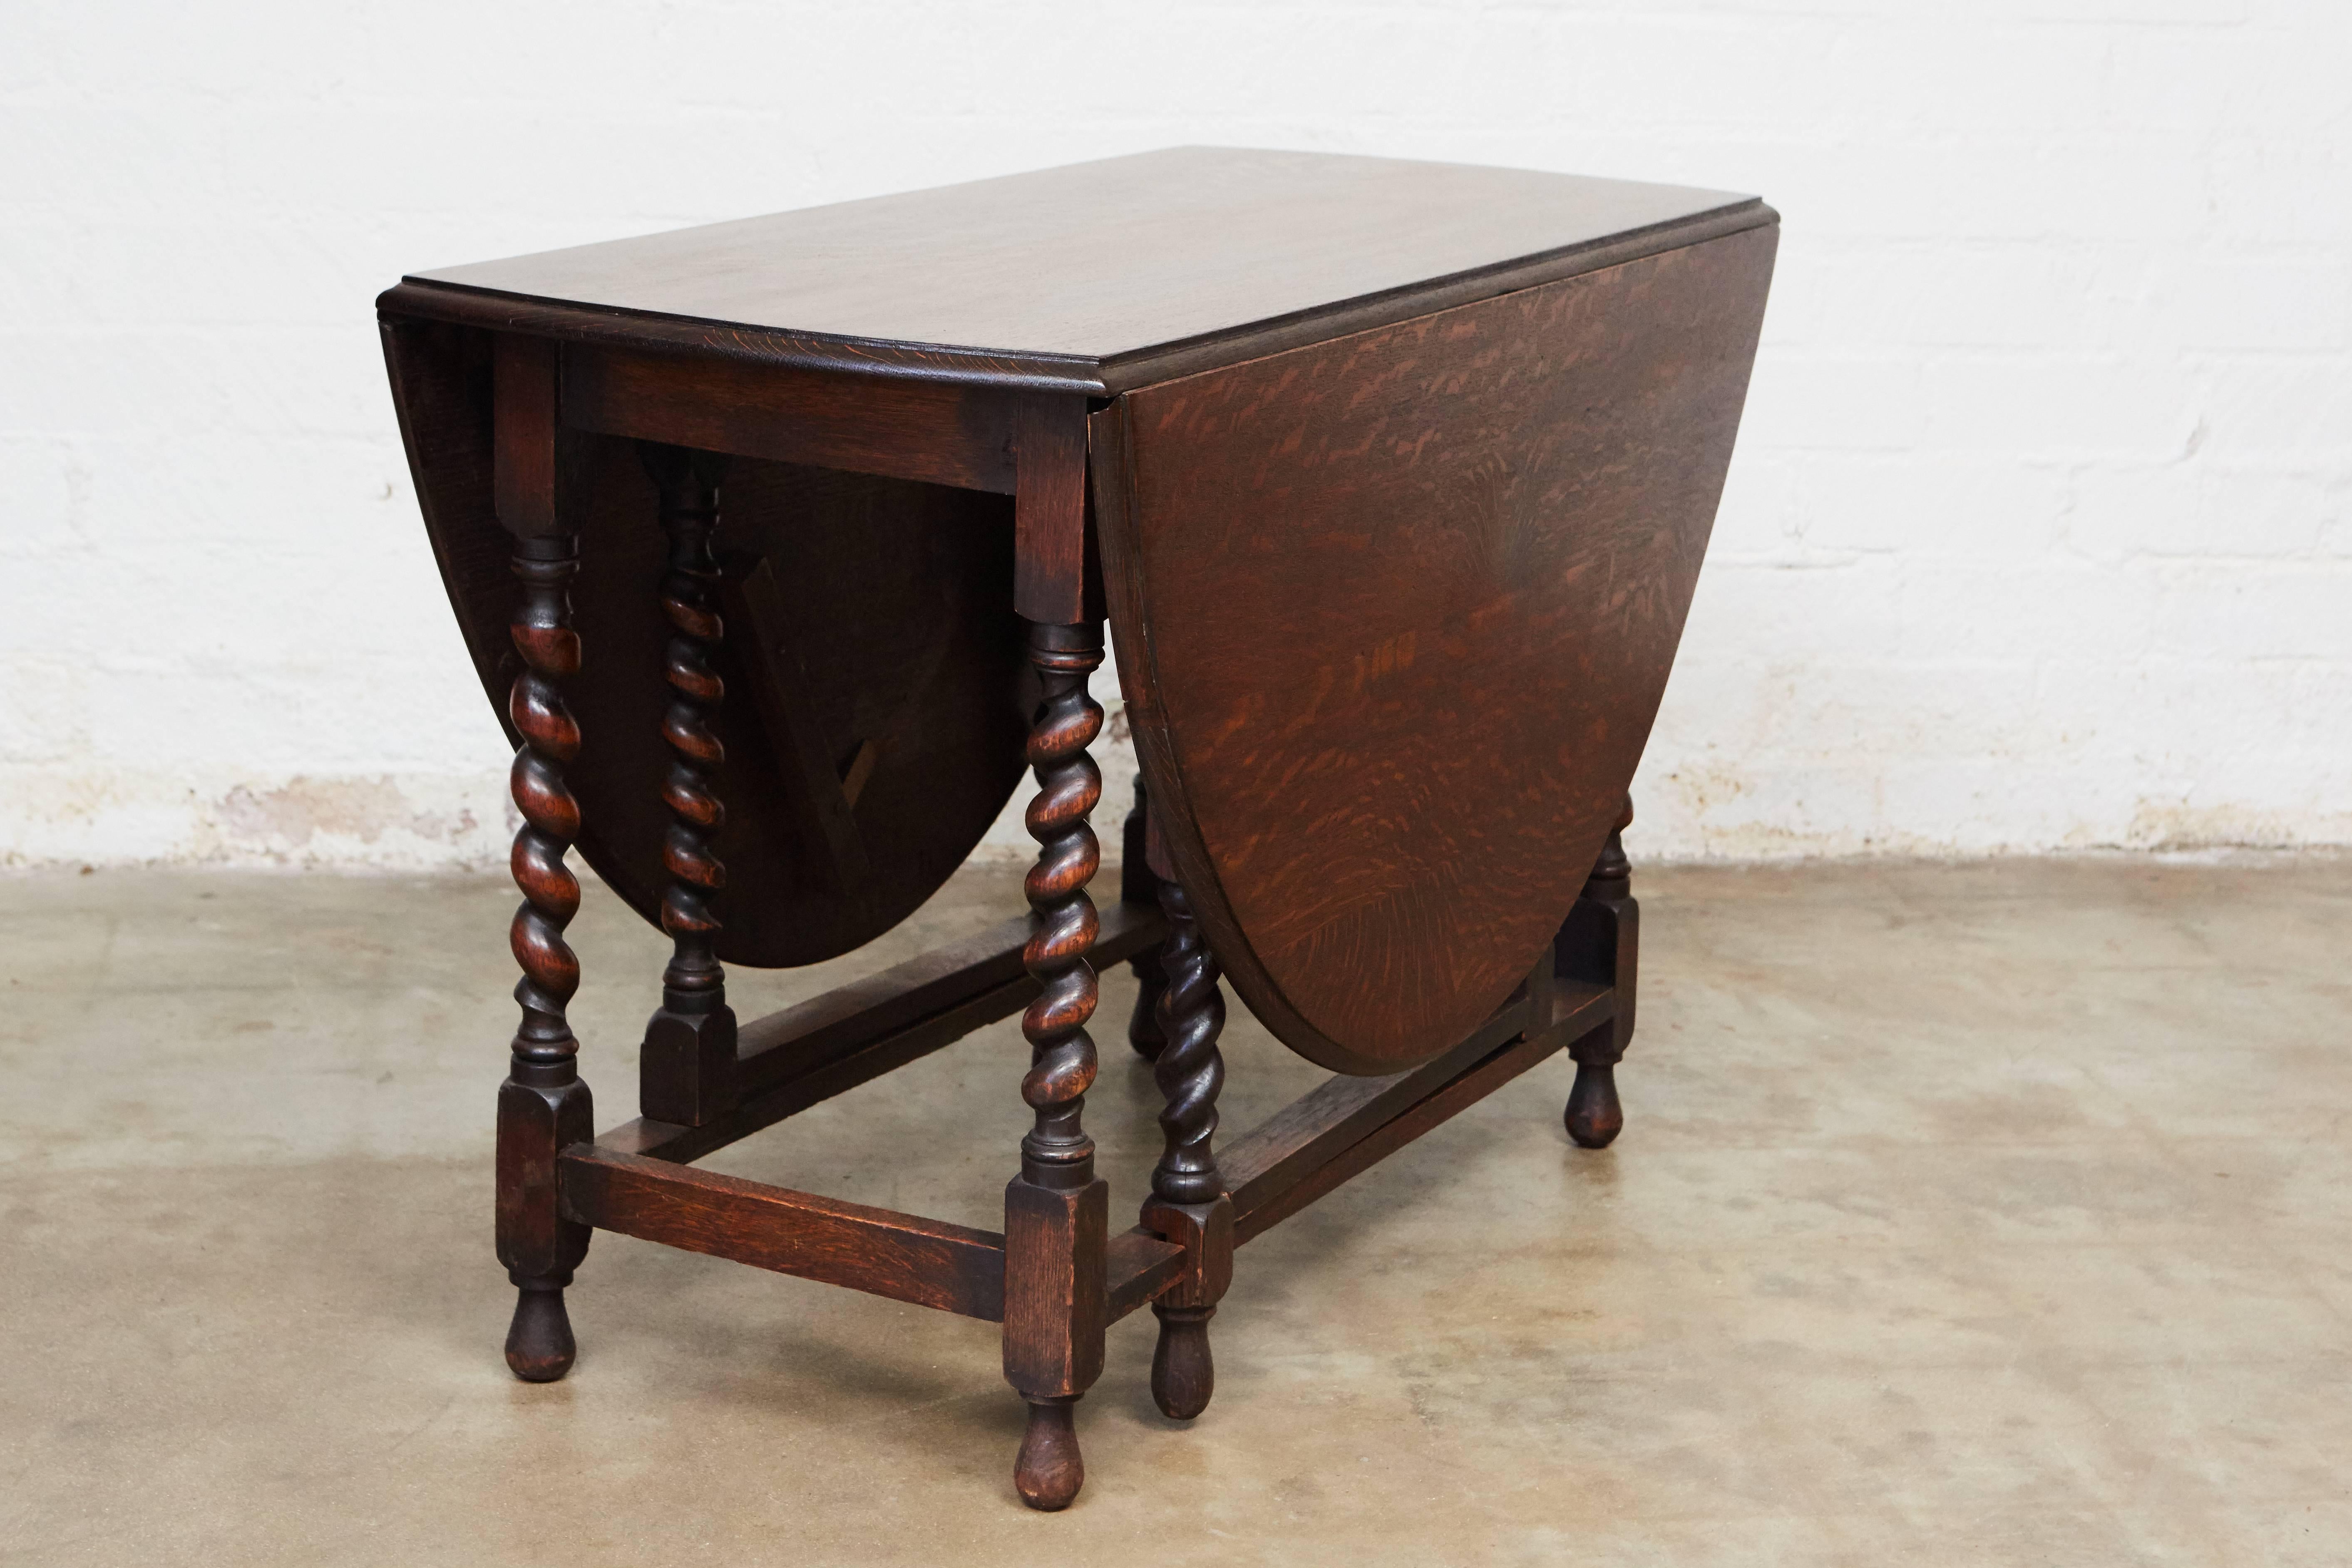 This pretty gate leg table is adjustable with an oval top when opened and a narrow rectangle when closed. Note the excellent craftsmanship with beveled edges on the table top, four stretchers and elegant barley twist legs. 

Measurements for table